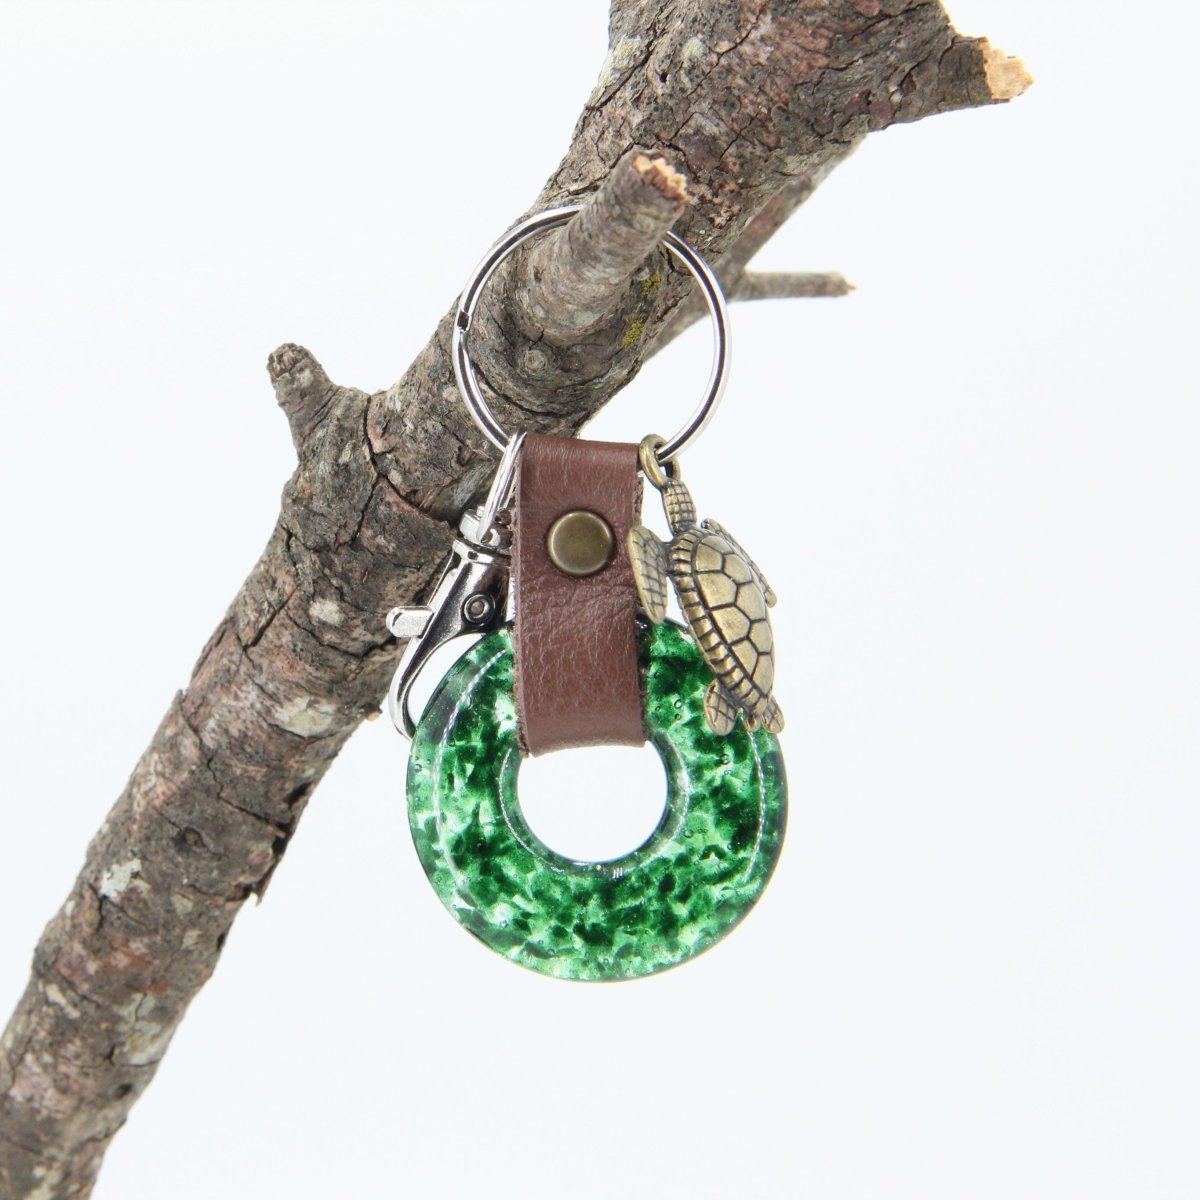 Glass and Leather Keychain with a Turtle Charm